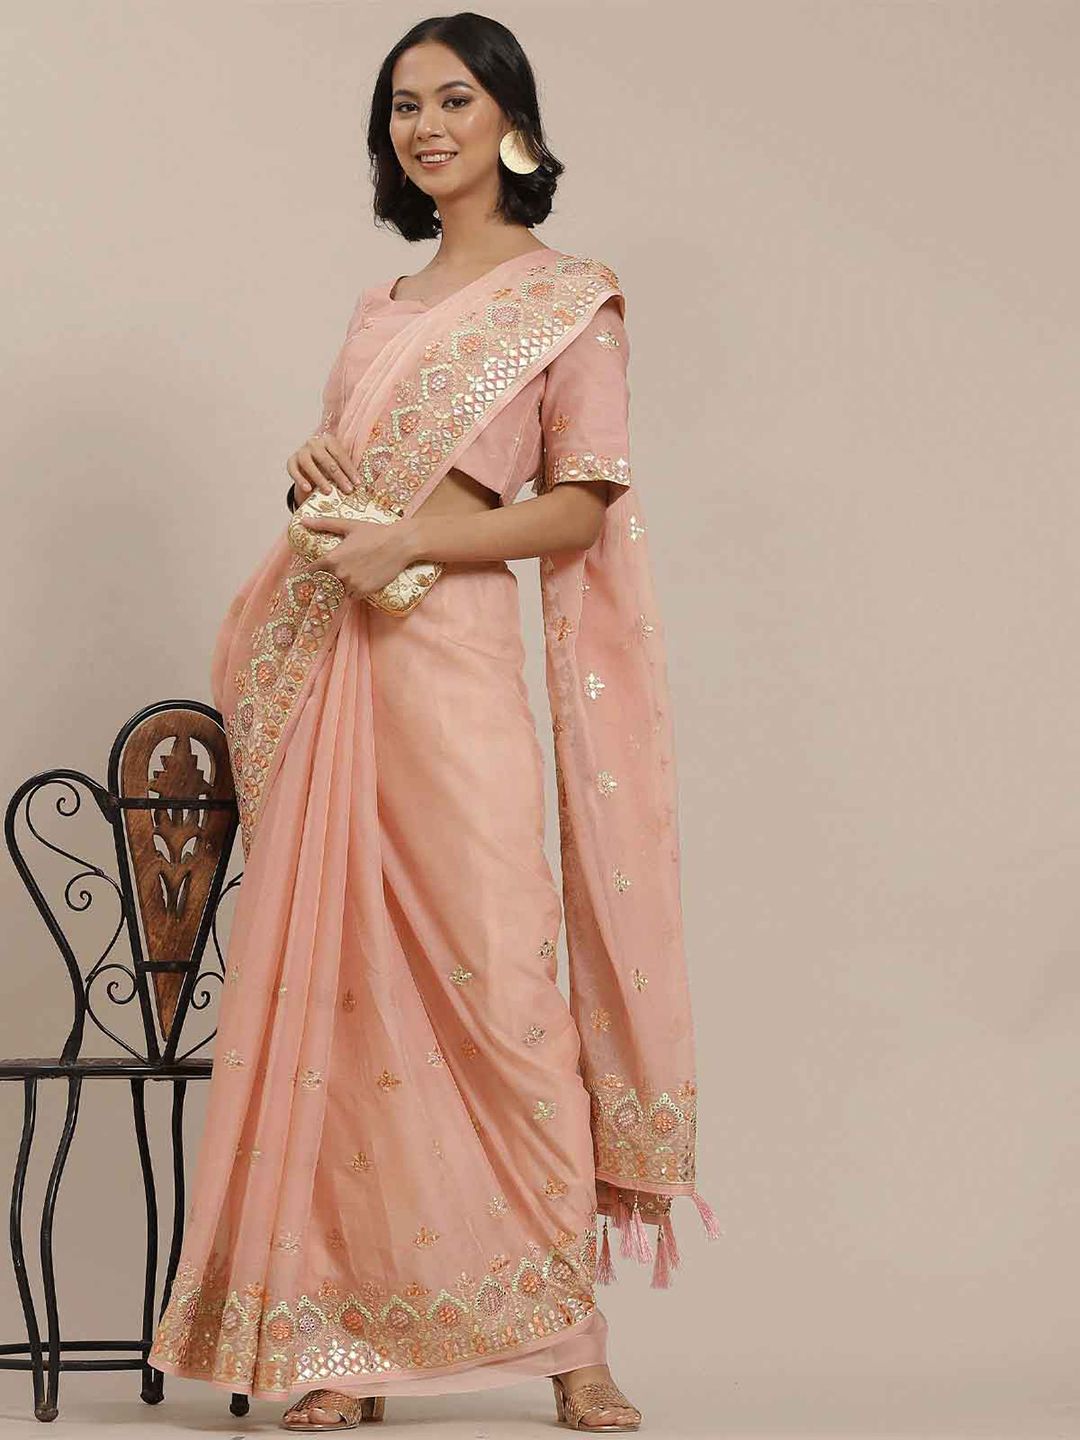 ODETTE Peach-Coloured & Gold-Toned Floral Embroidered Art Silk Saree Price in India